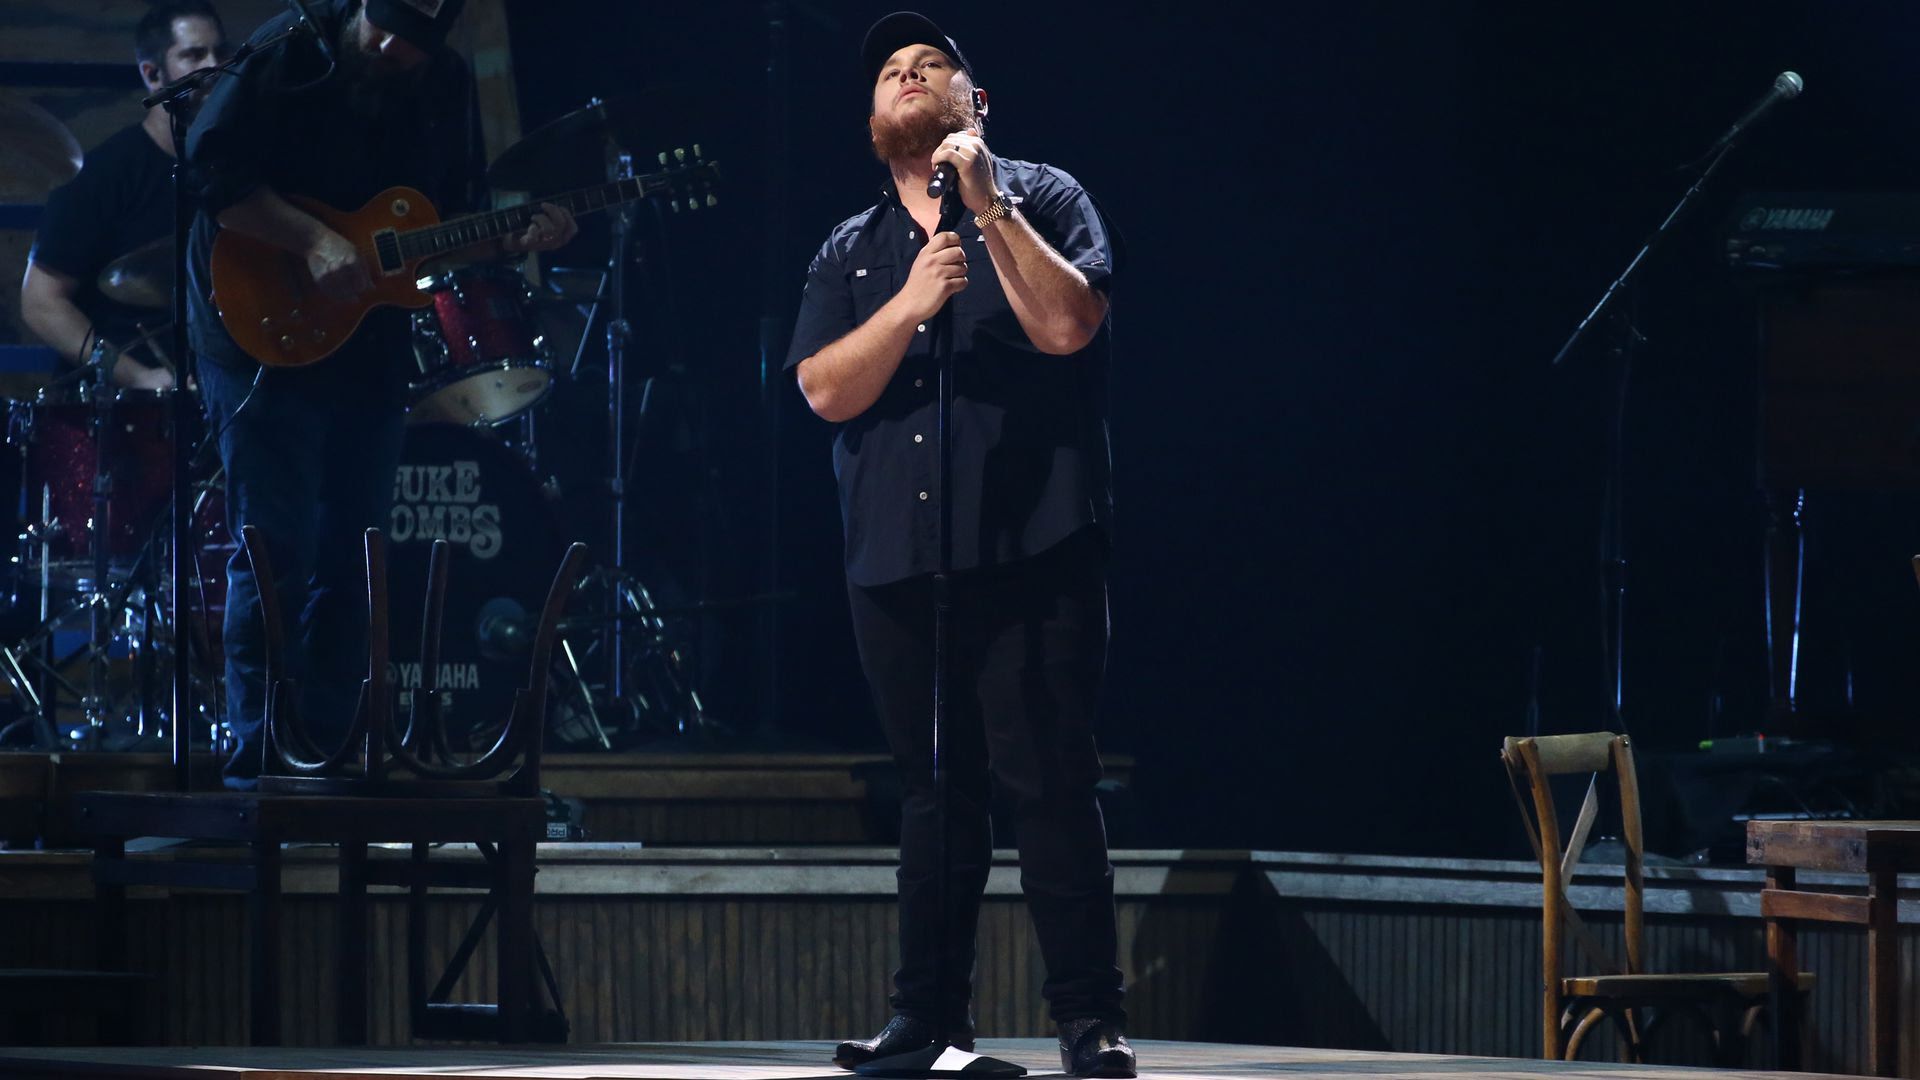 Luke Combs performs at the CMA Awards on Wednesday in a black button down short sleeve shirt